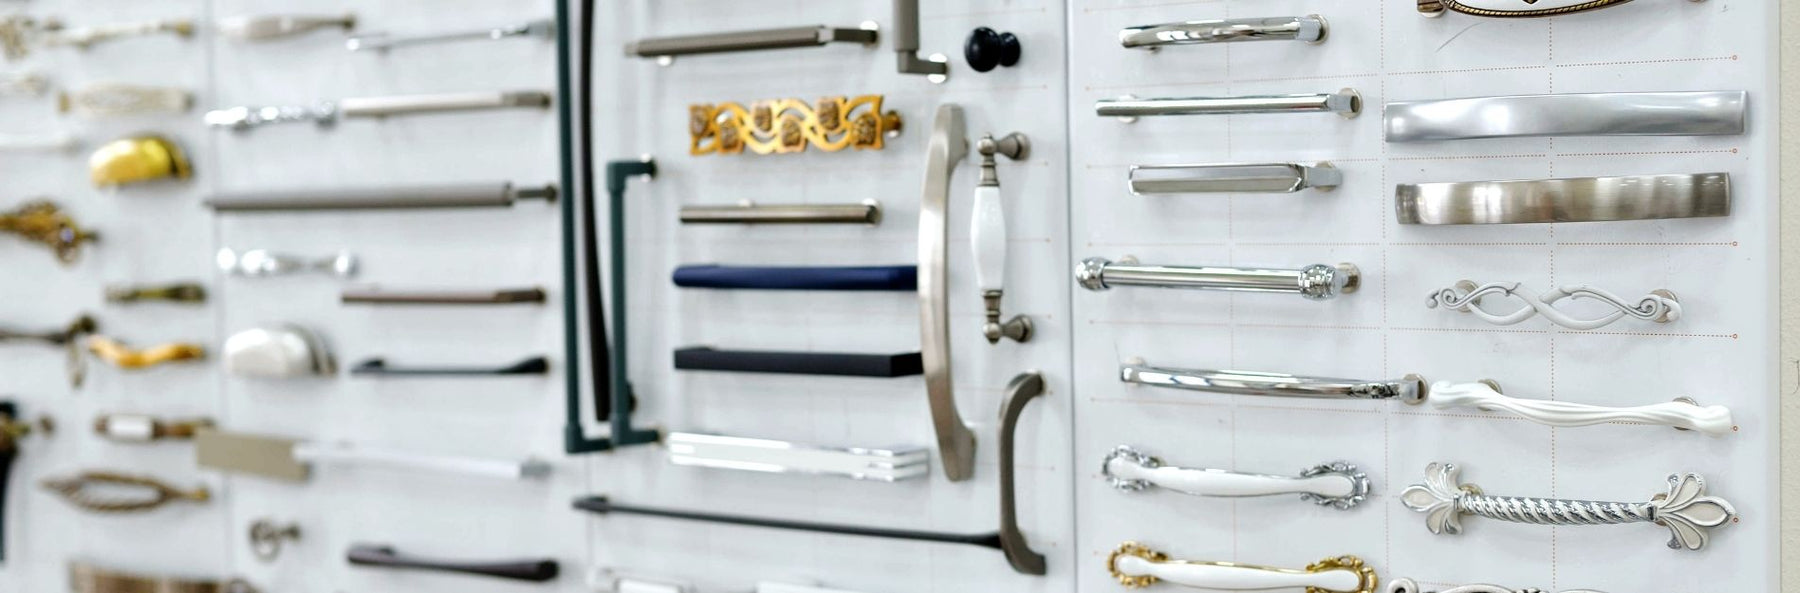 Tips for Selecting Cabinet Knobs and Pulls for Your Kitchen